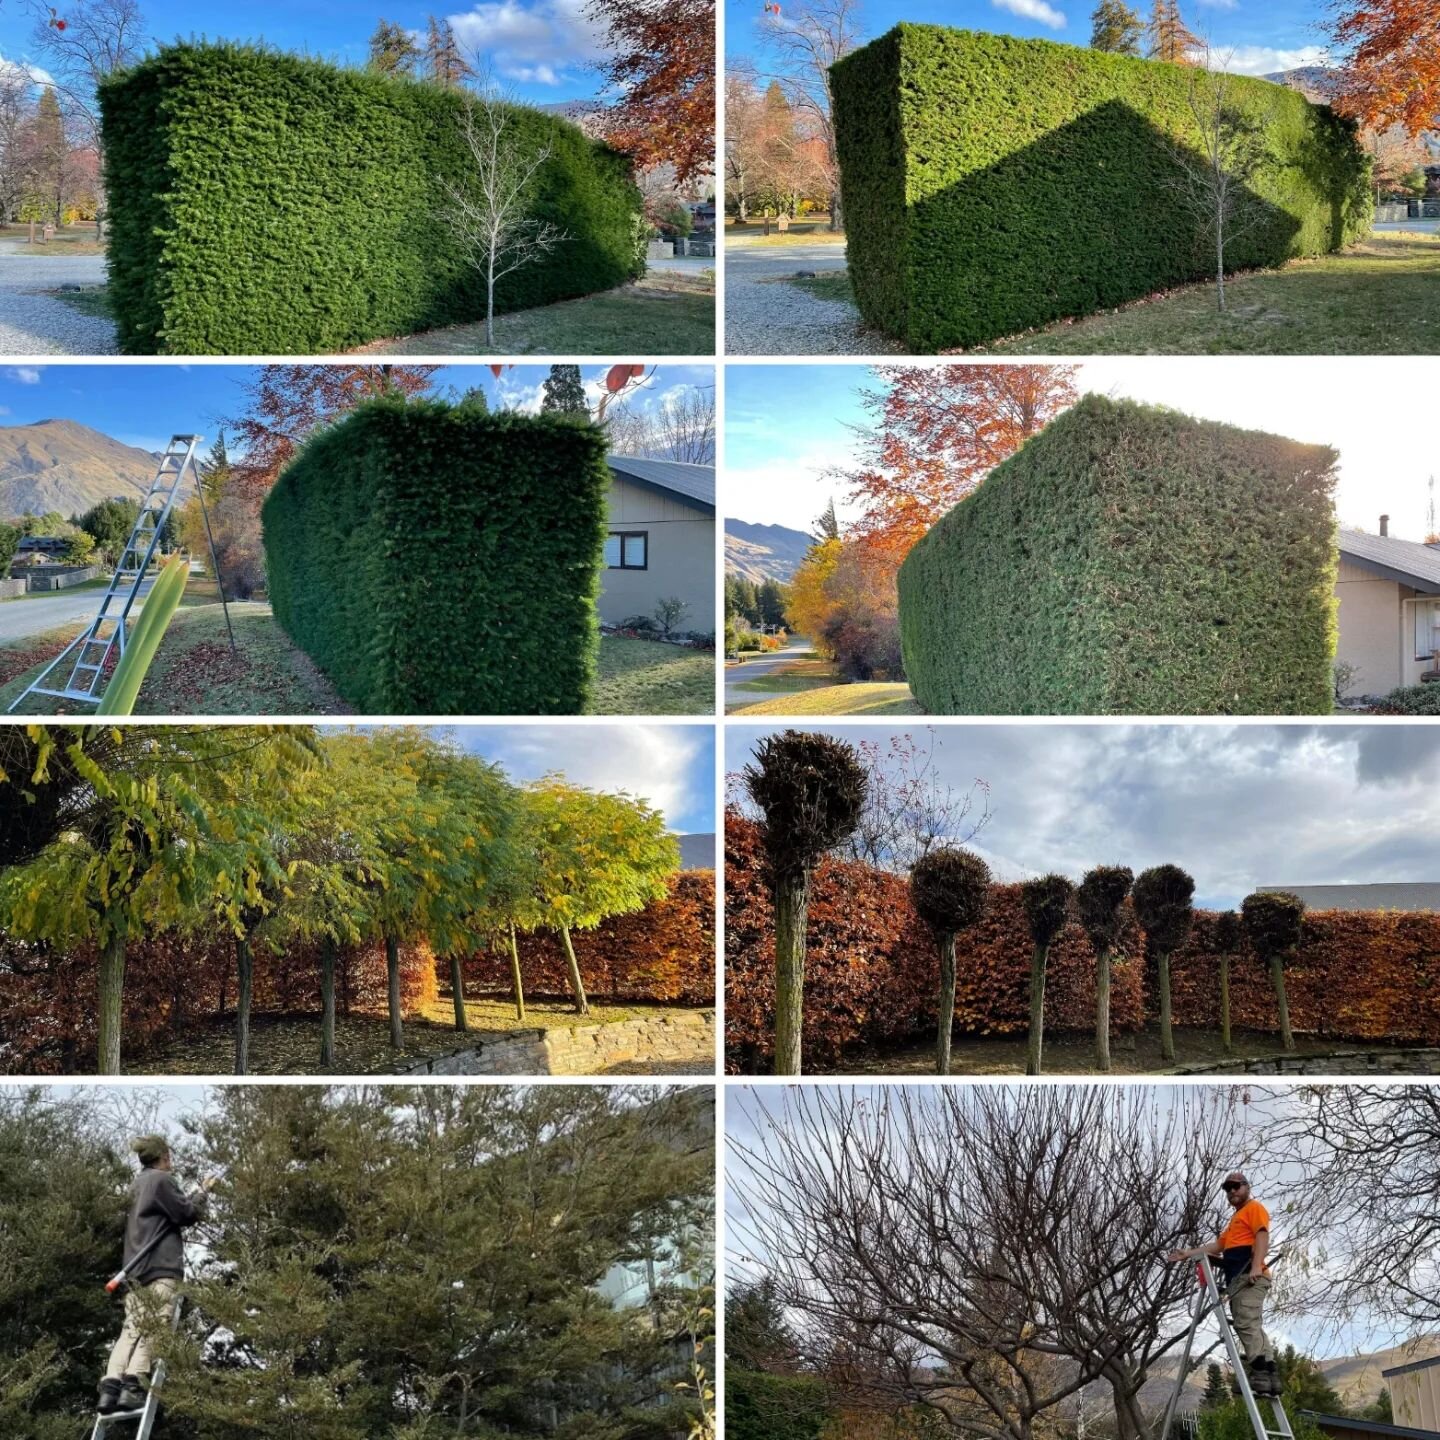 Some before and after and action shots from this week...hedges and trees...must be autumn!

#dougthegardener #gardenwanaka #landscapewanaka #wanakagardens #wanakagarden #wanakagardening #landscape #lovewanaka #landscape_captures #gardening #garden #g